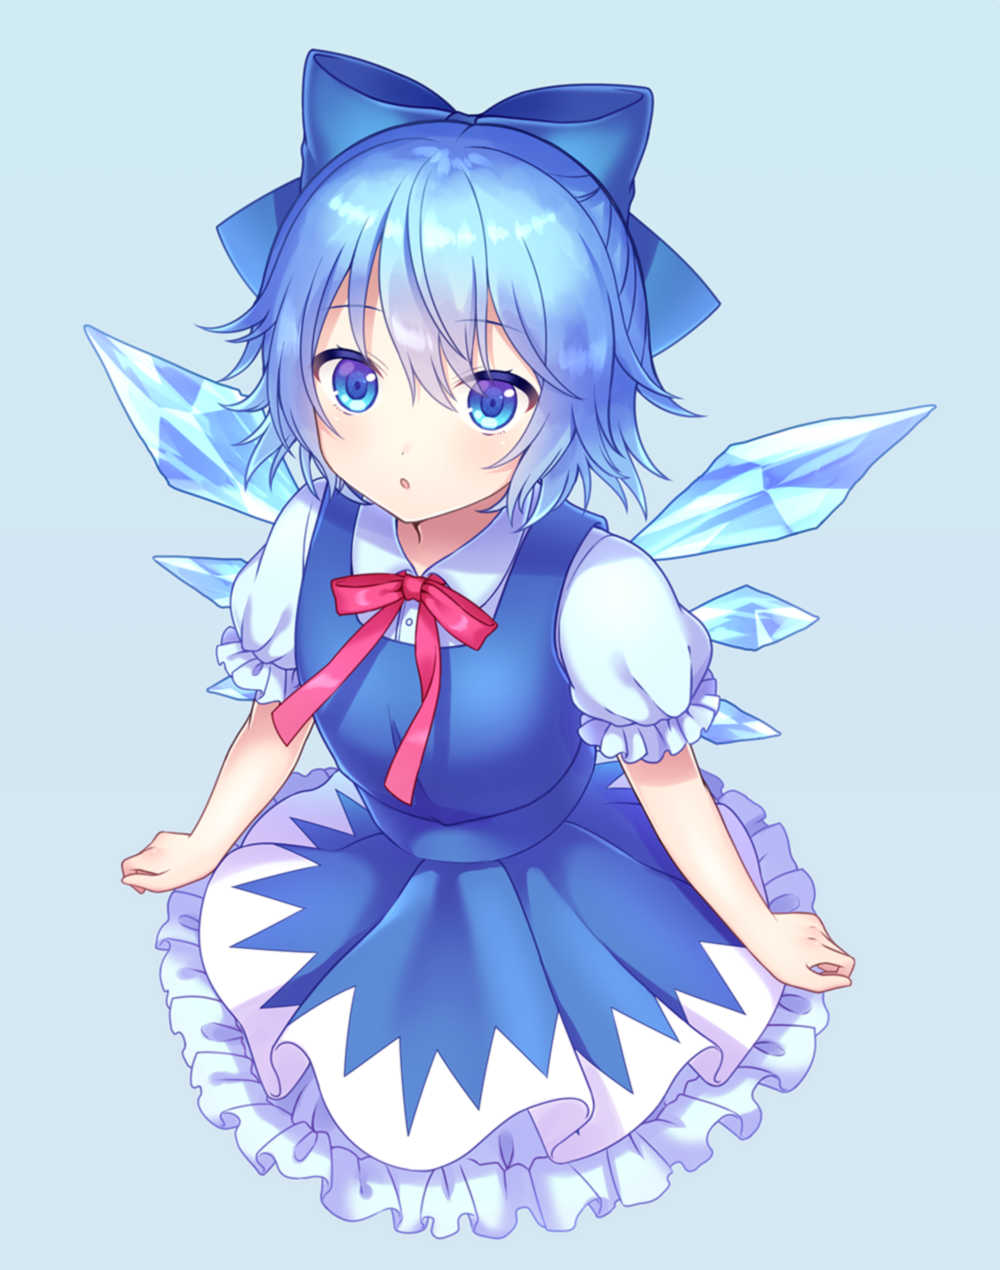 Cirno by a href="https://alphacoders.com/author/view/32038"や ま ゆ/...